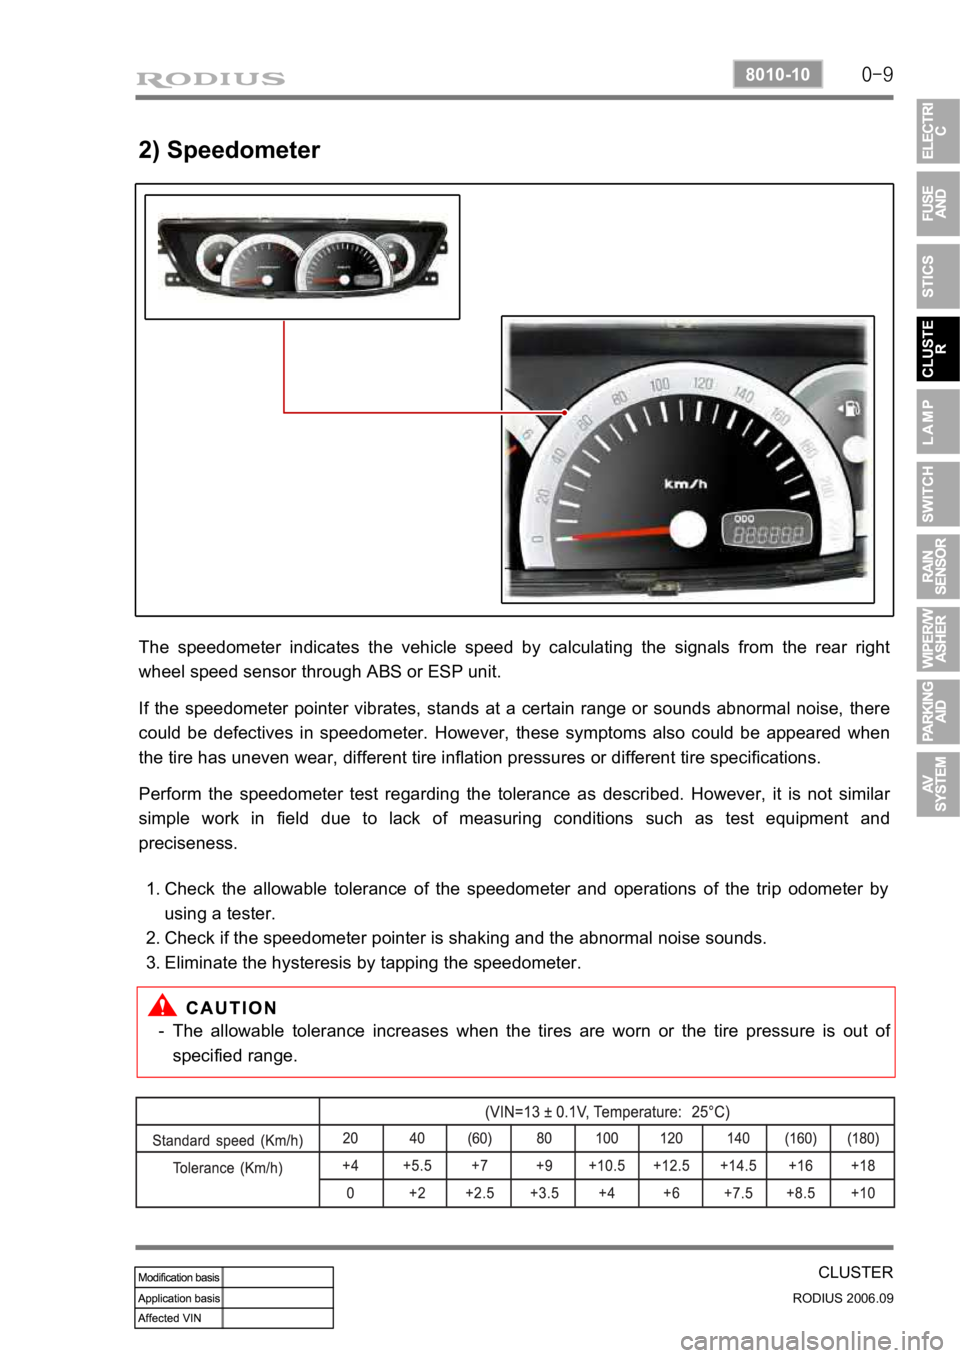 SSANGYONG RODIUS 2007  Service Manual 0-9
CLUSTER
RODIUS 2006.09
8010-10
2) Speedometer
The speedometer indicates the vehicle speed by calculating the signals from the rear right 
wheel speed sensor through ABS or ESP unit.
If the speedom